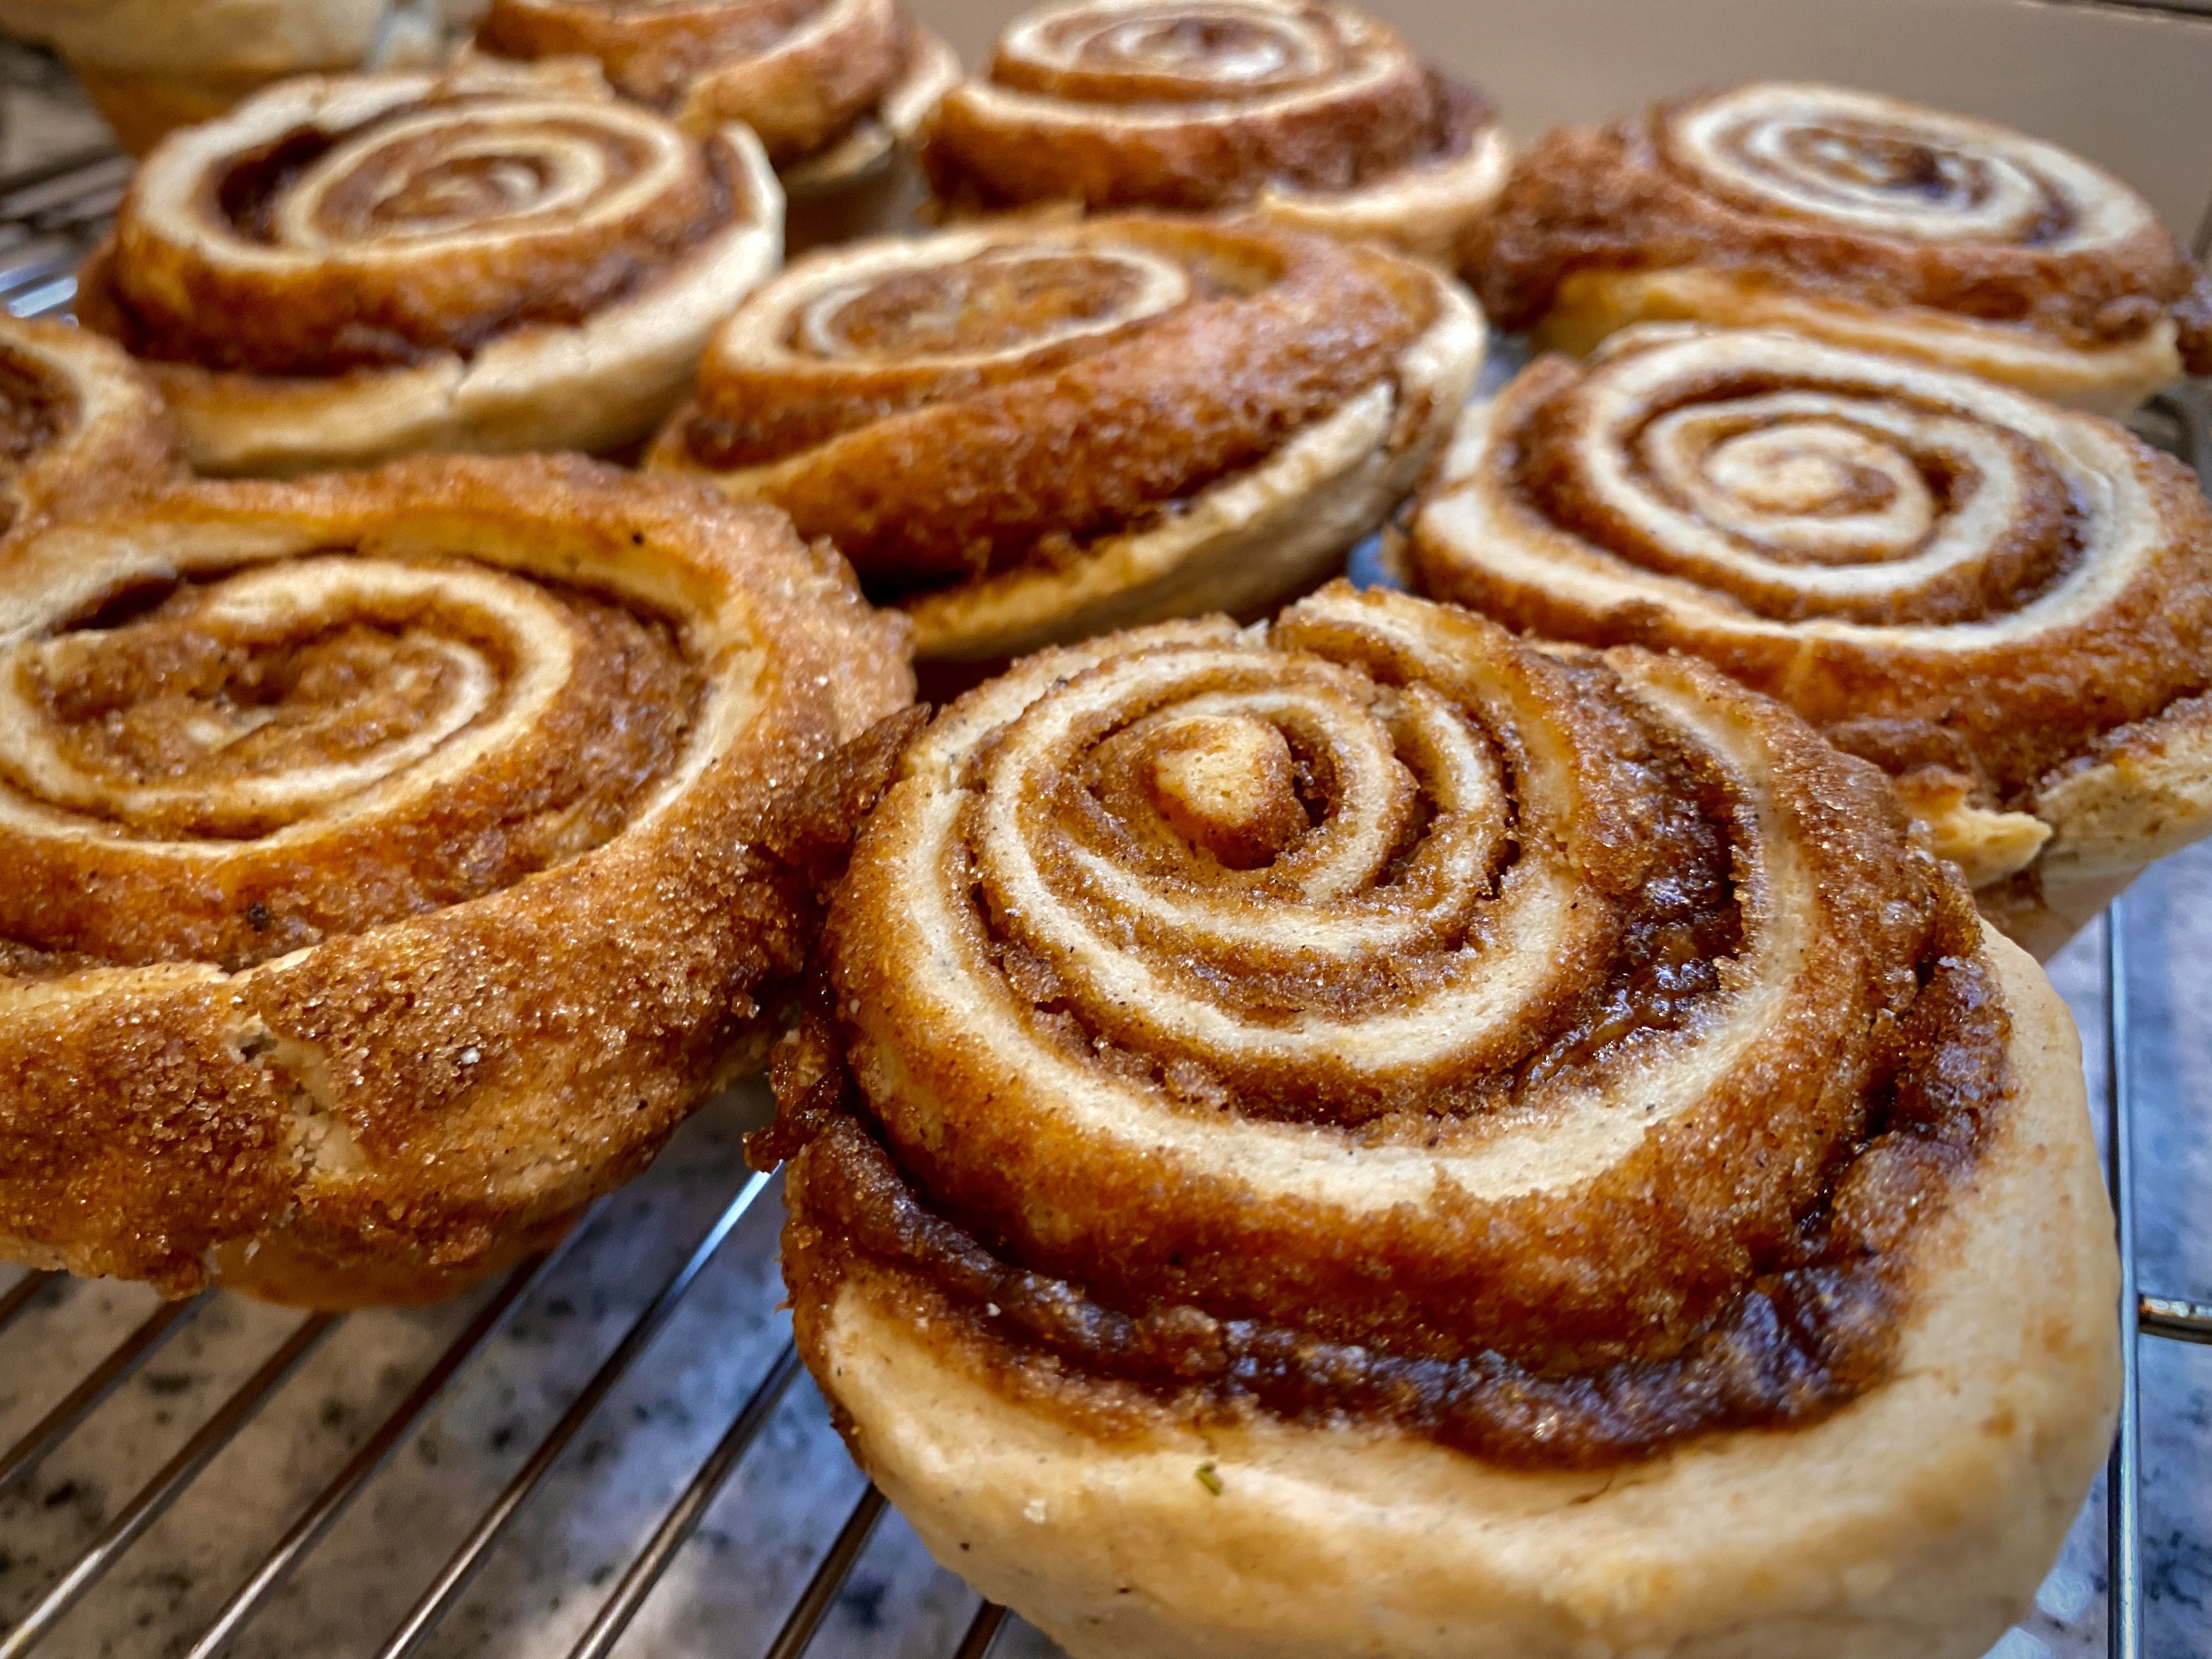 Our attempt at cinnamon buns from Claire Ptak’s ‘Violet Bakery Cookbook.’